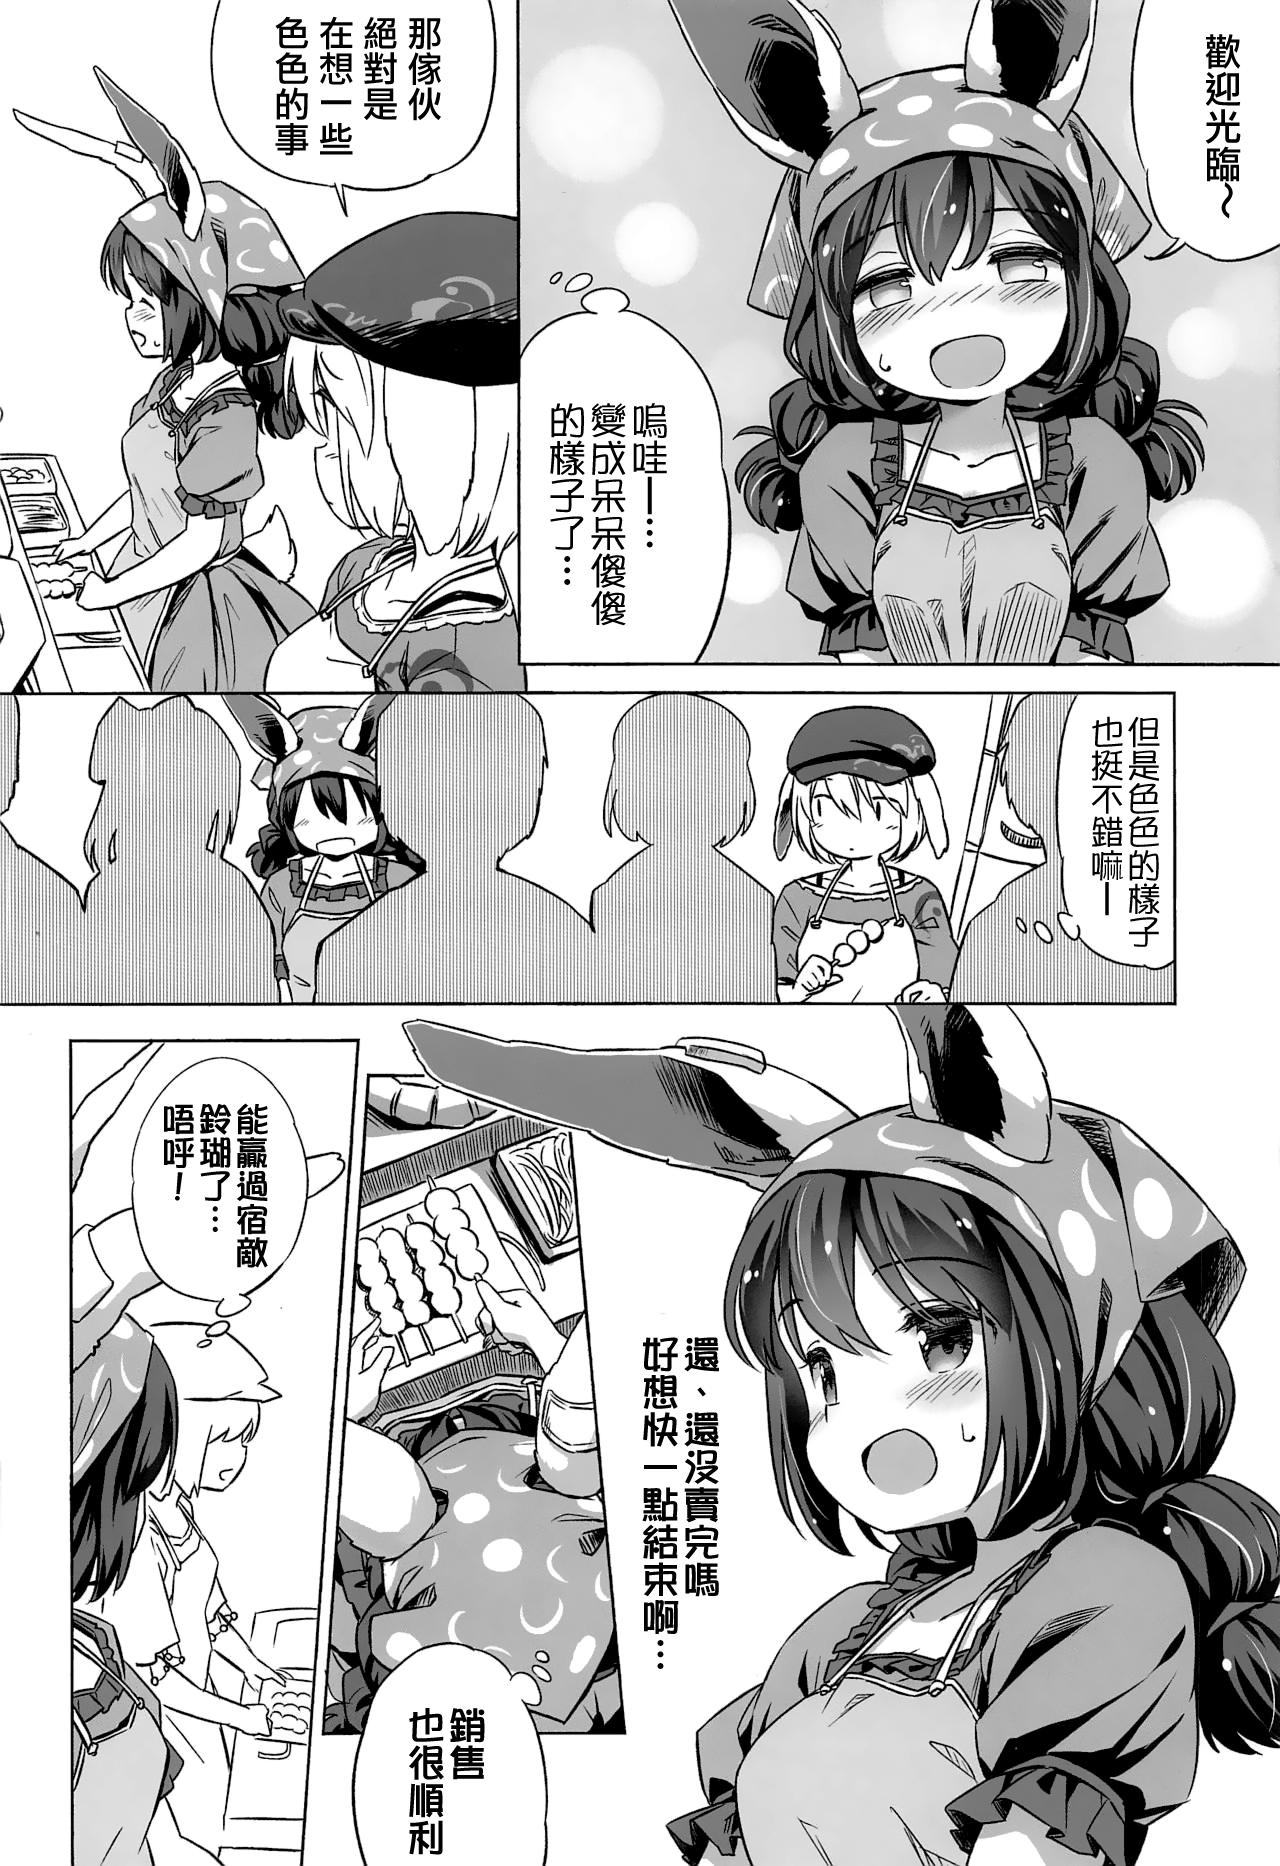 With Granny Smith Mating - Touhou project Nice Ass - Page 9